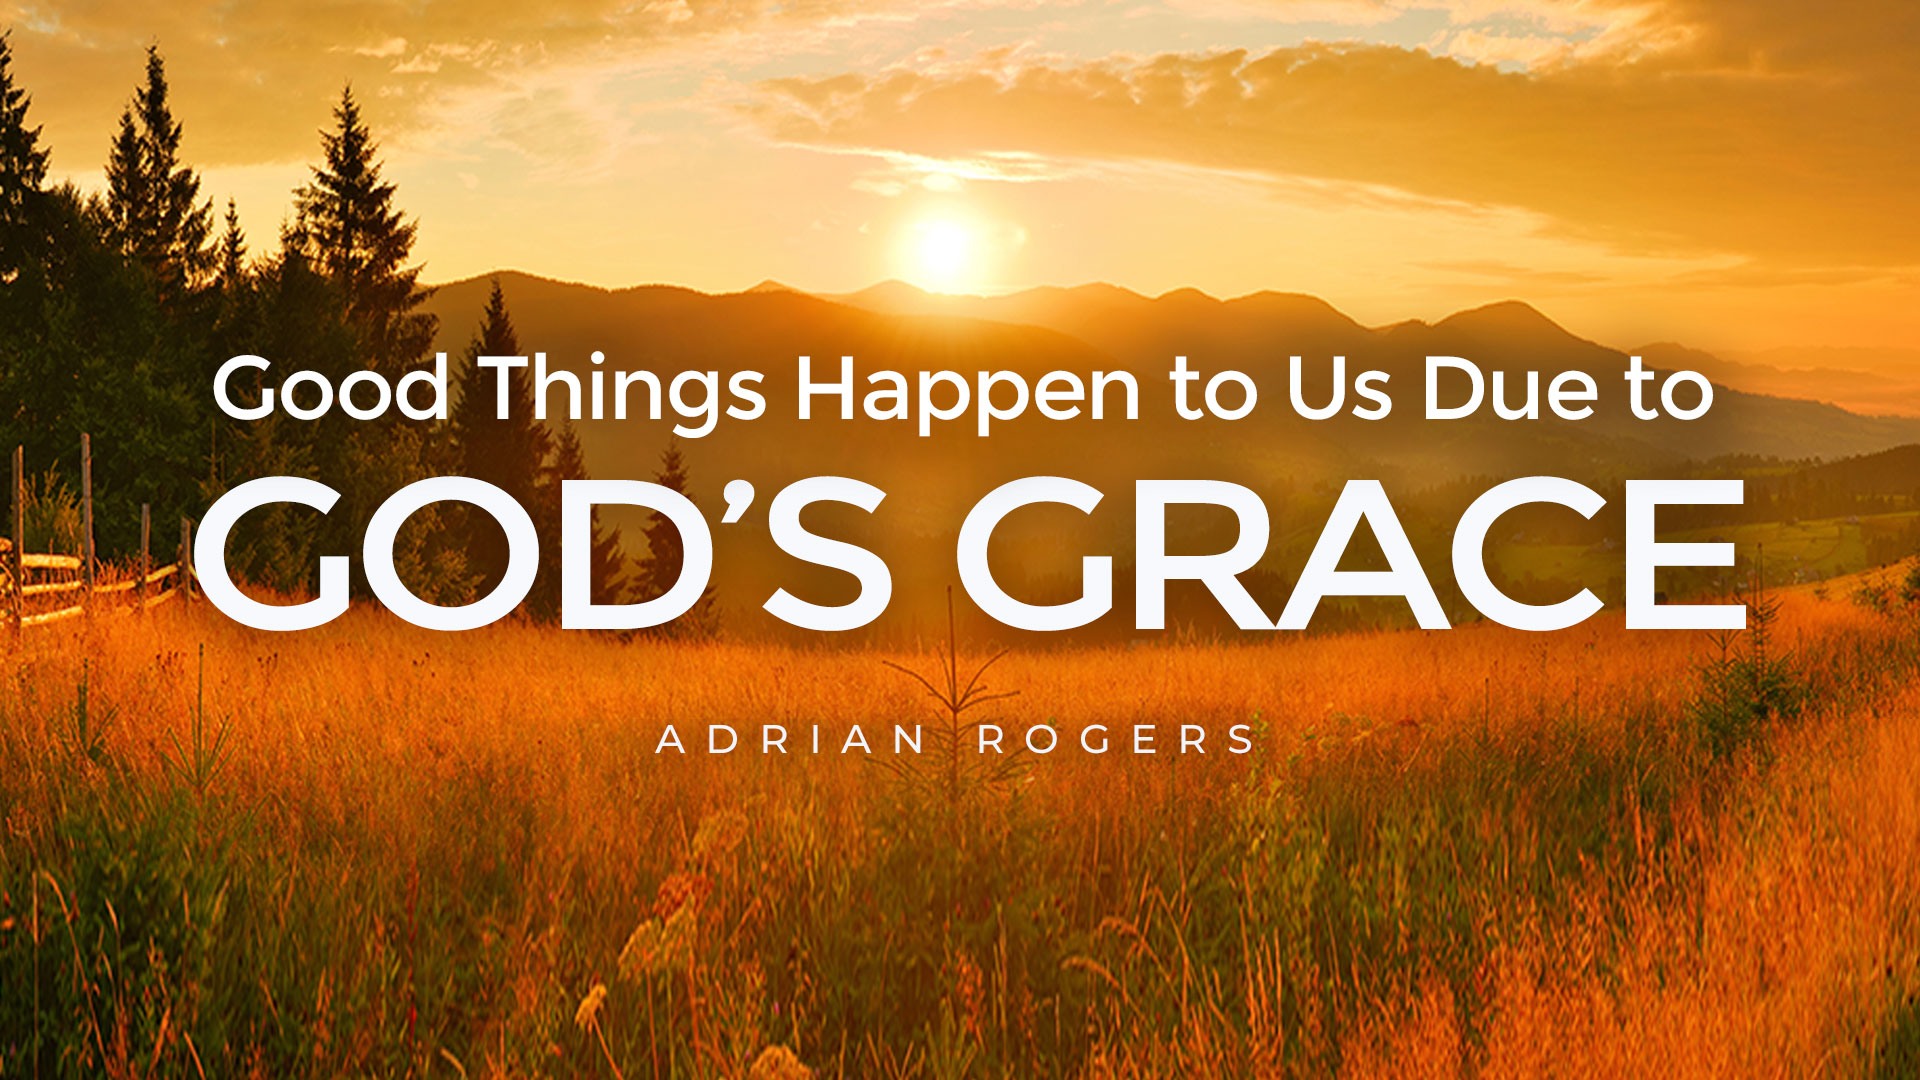 By God's Grace|Hardcover